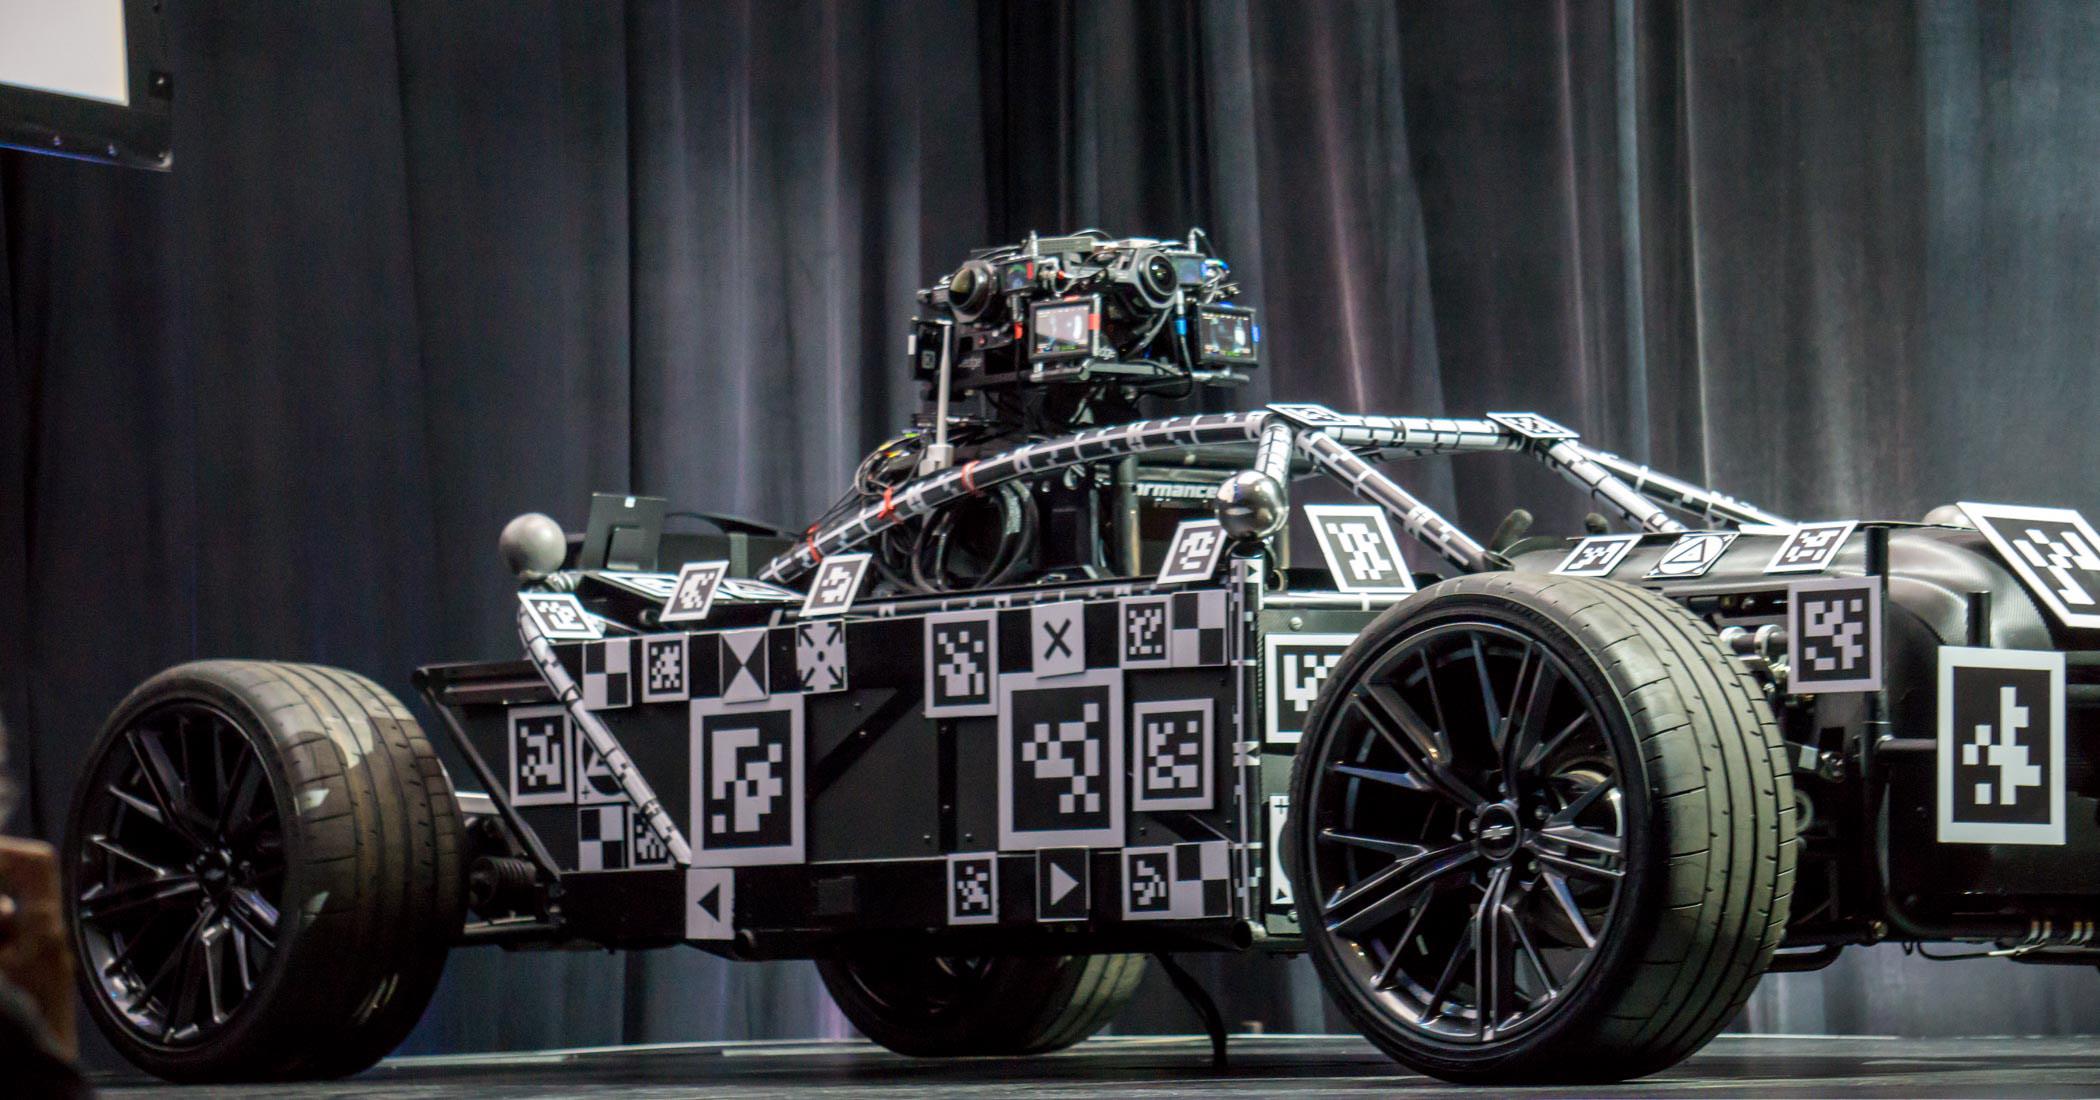 The Mill's MoCap car, Blackbird made an appearance at Epic’s State of Unreal talk. (Source: JPR)